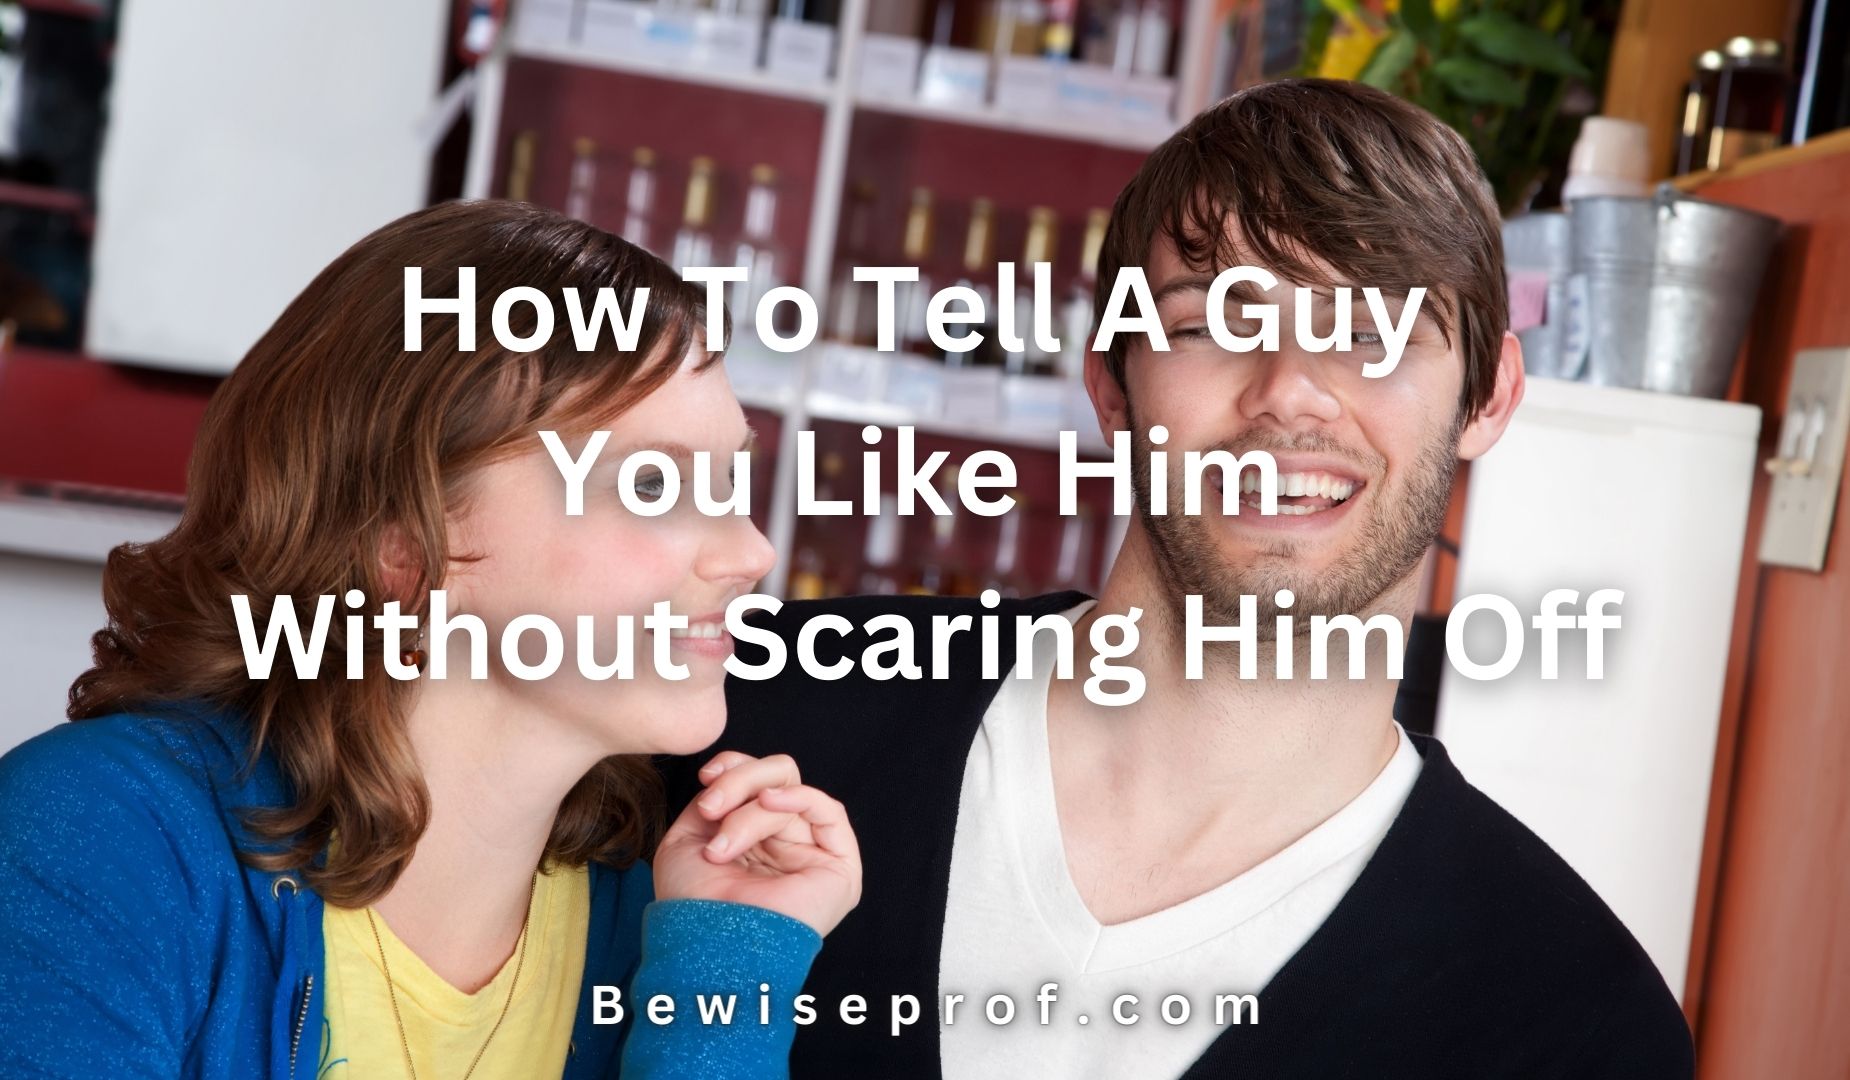 How To Tell A Guy You Like Him Without Scaring Him Off